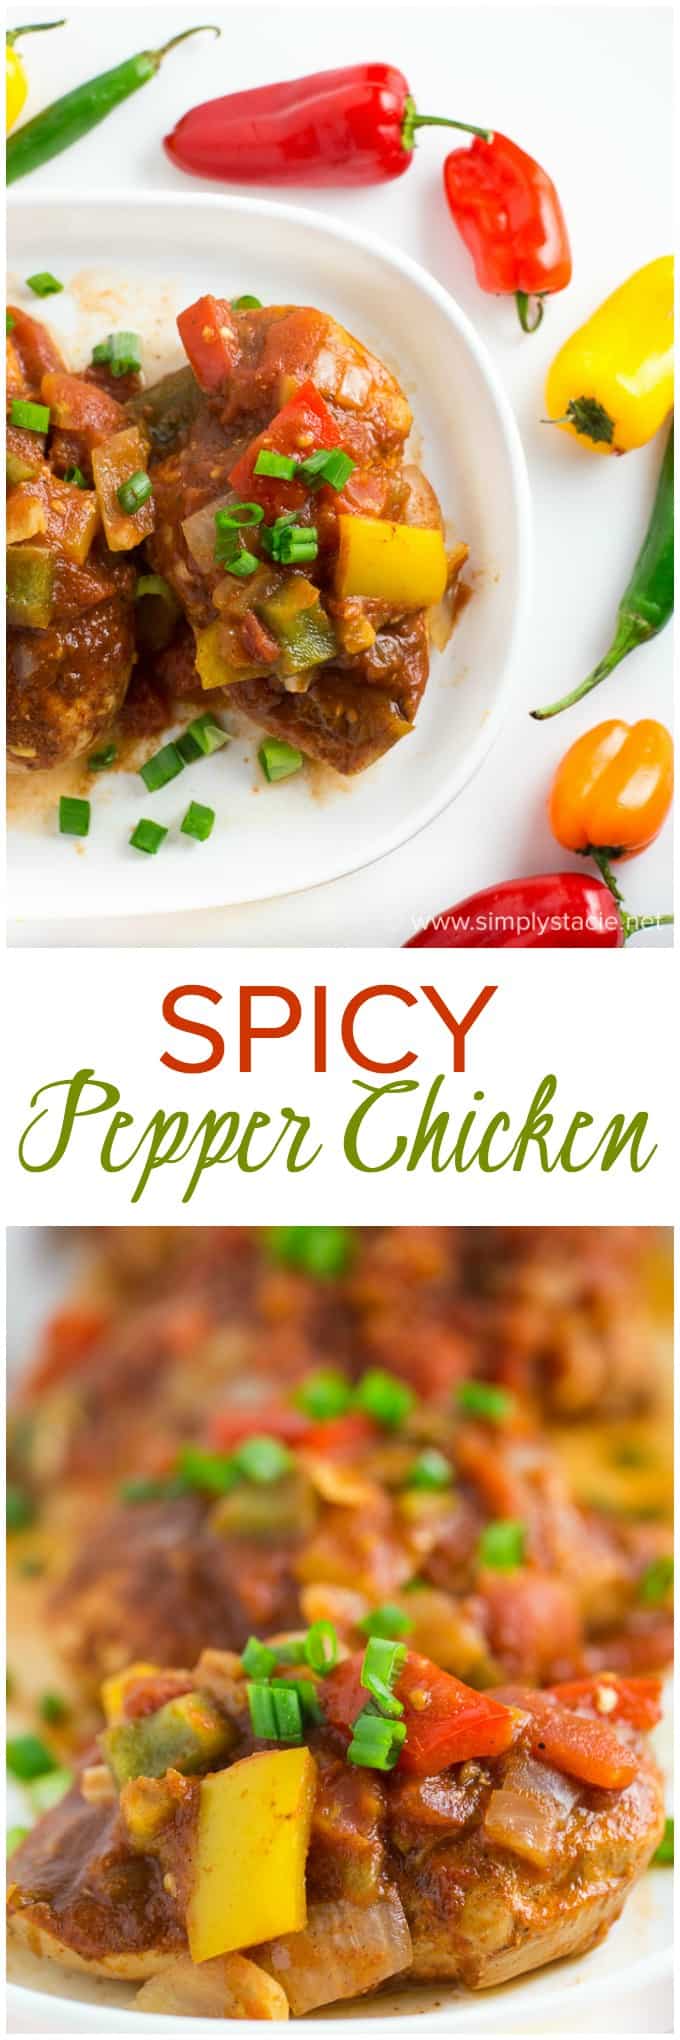 Spicy Pepper Chicken - Add some heat to your plate tonight! This healthy baked chicken dish is covered in 4 types of peppers for some serious spice.